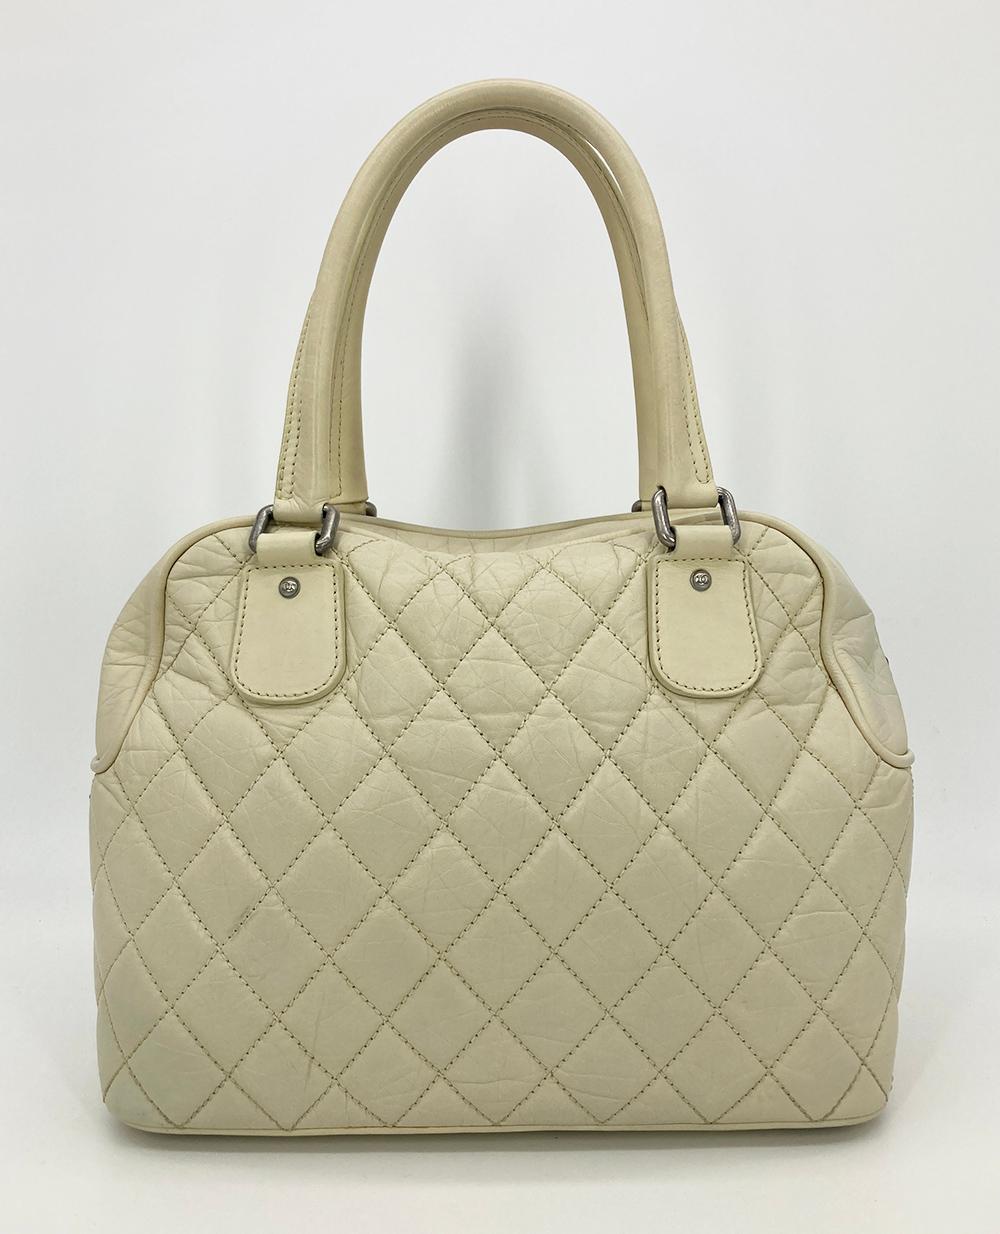 Brown Chanel Paris New York Cream Distressed Bowling Tote For Sale